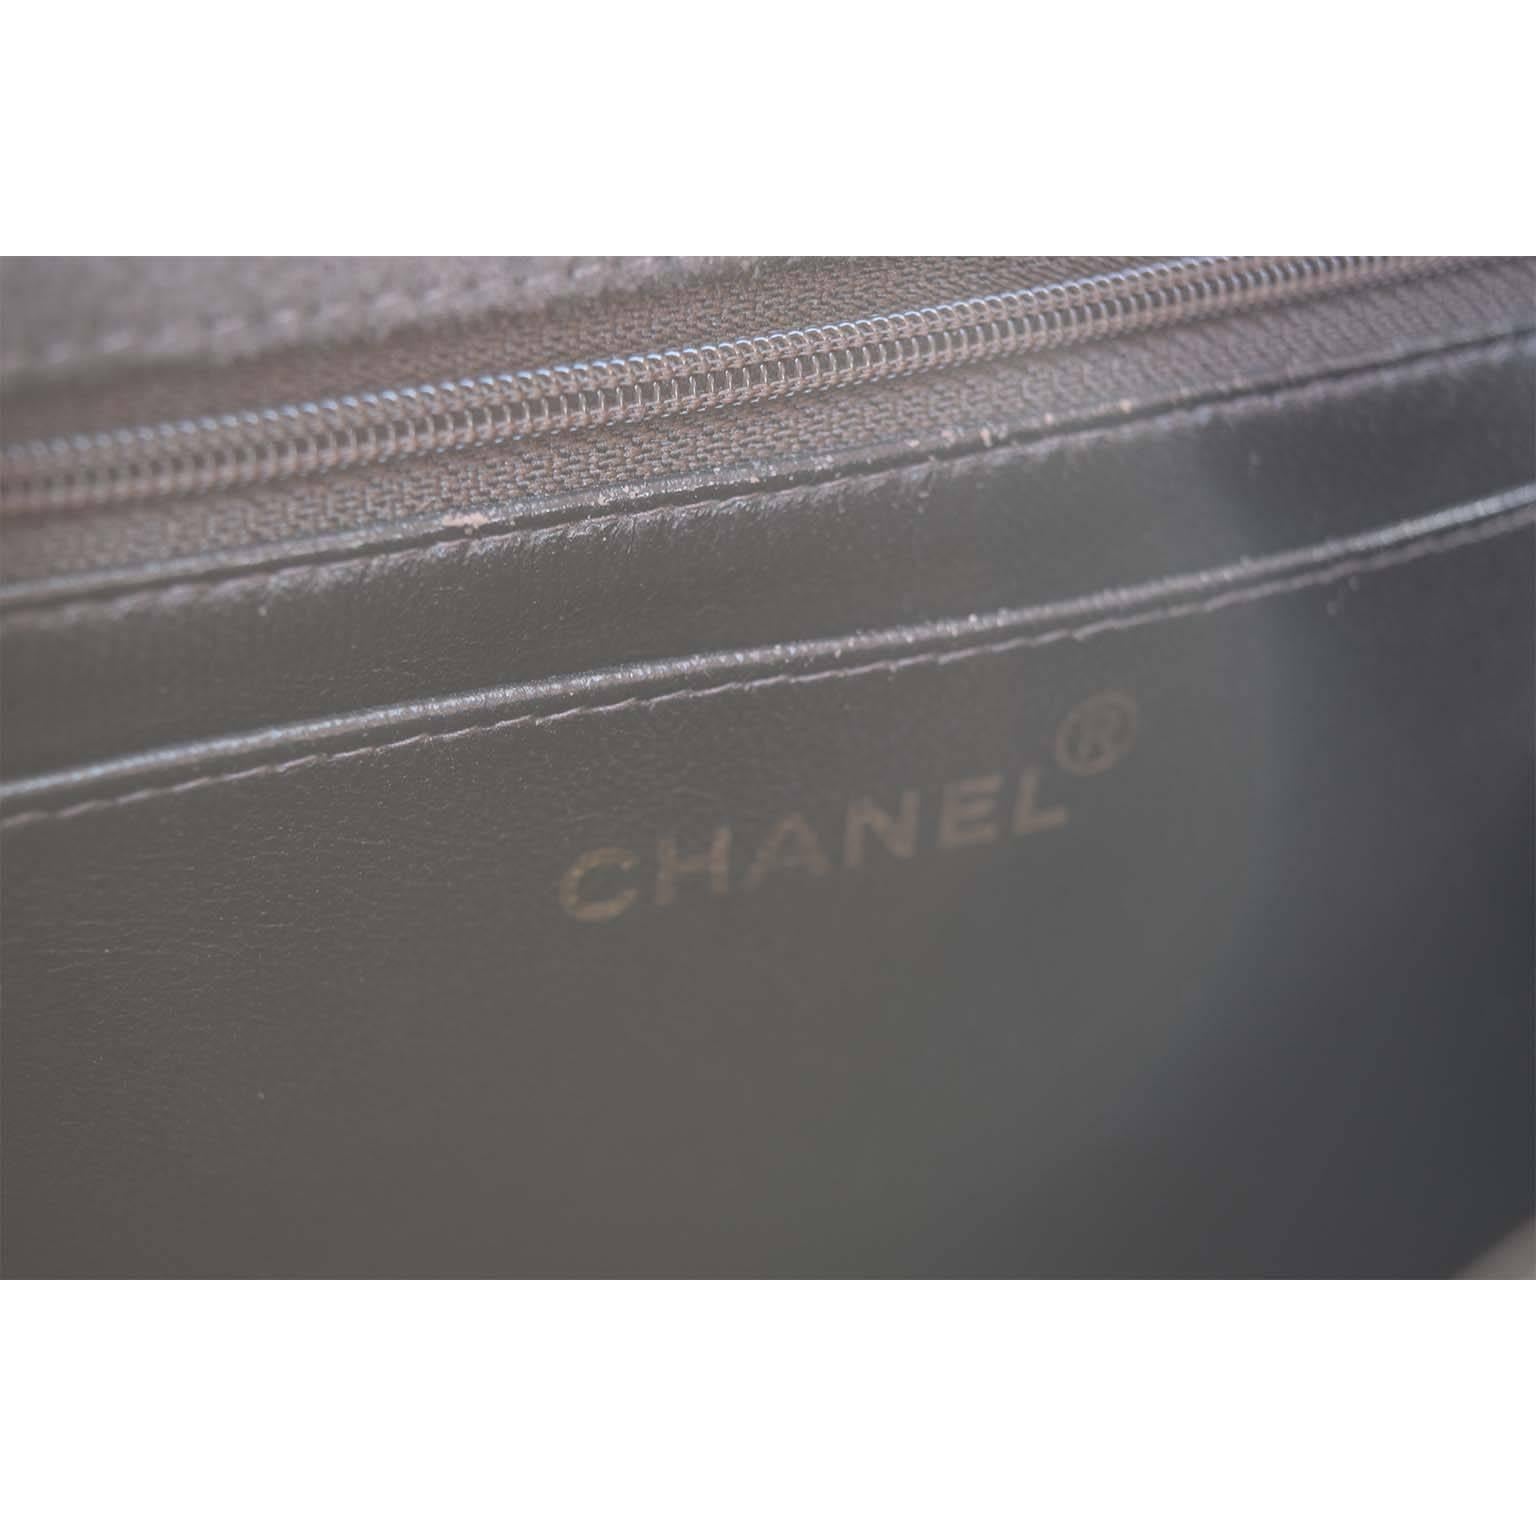 Chanel quilted brown suede handbag 1998 1